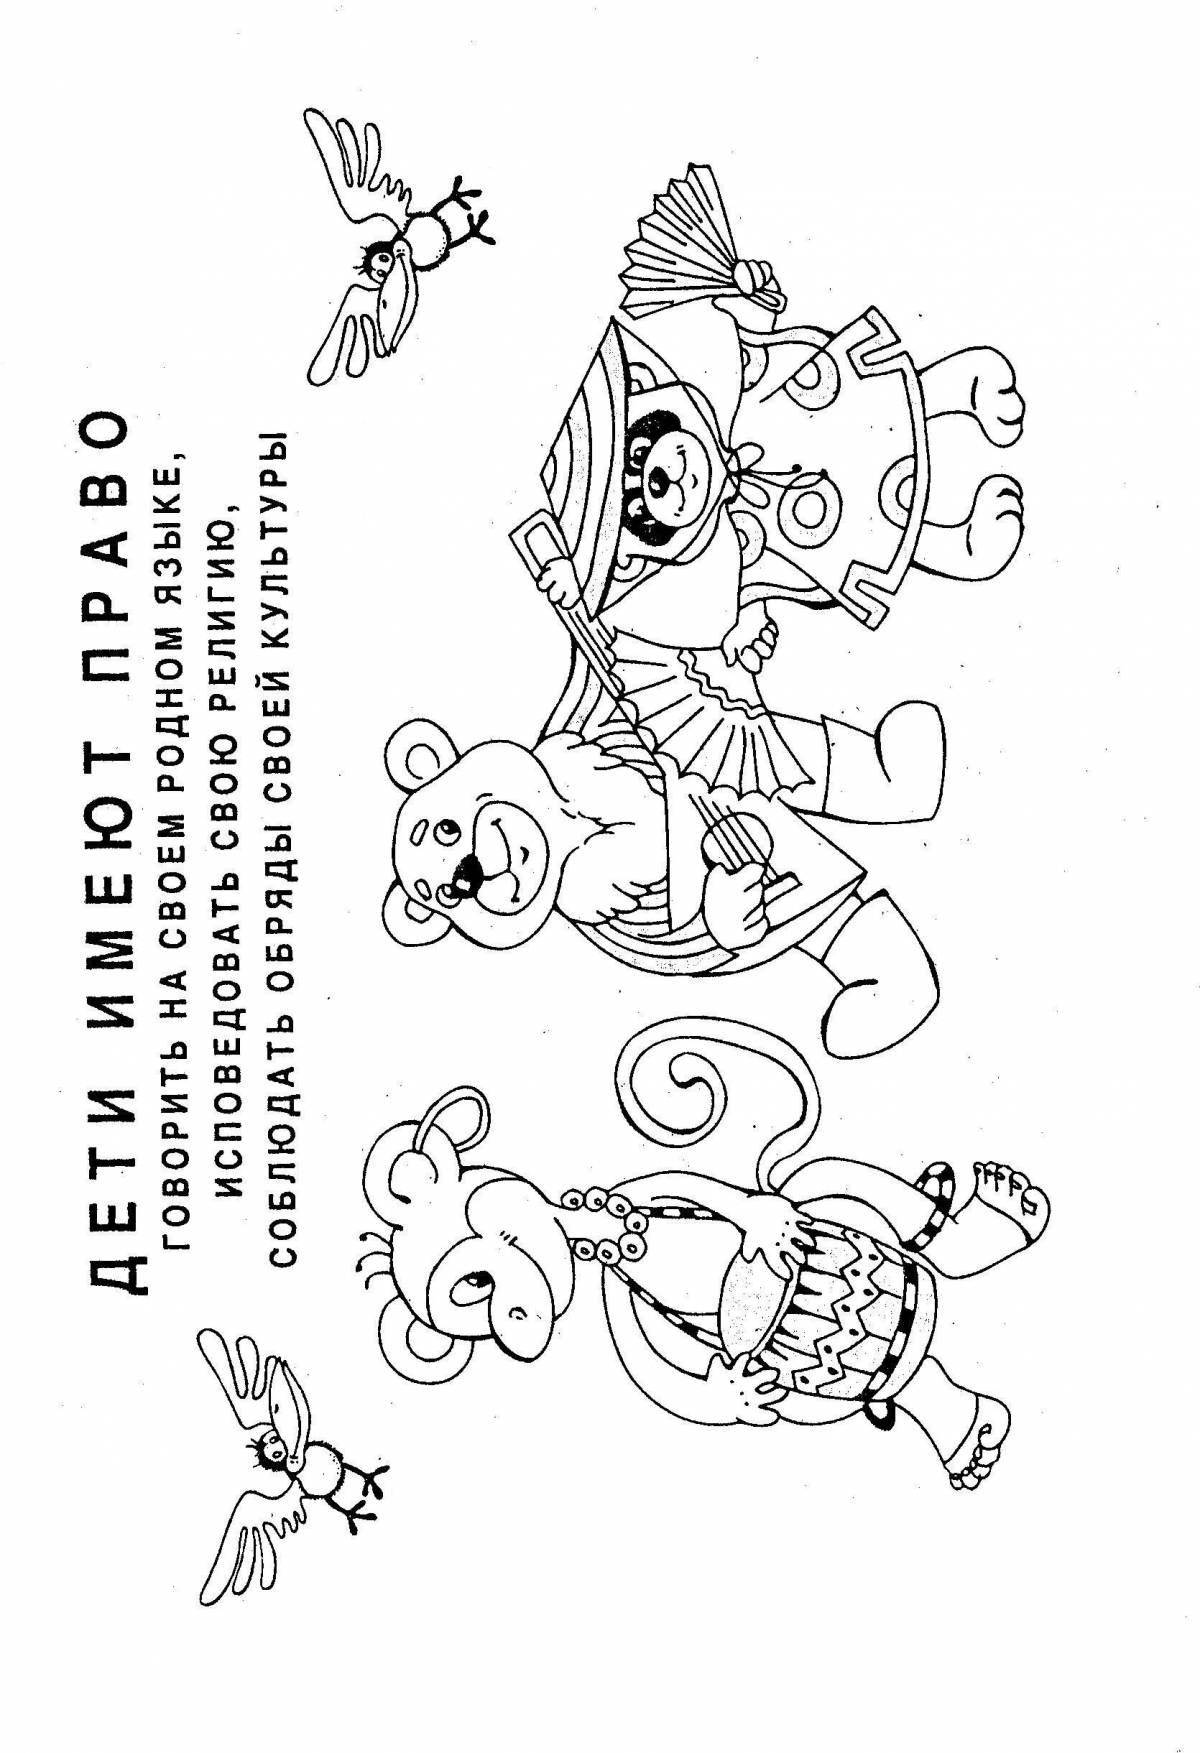 Creative children's rights coloring book